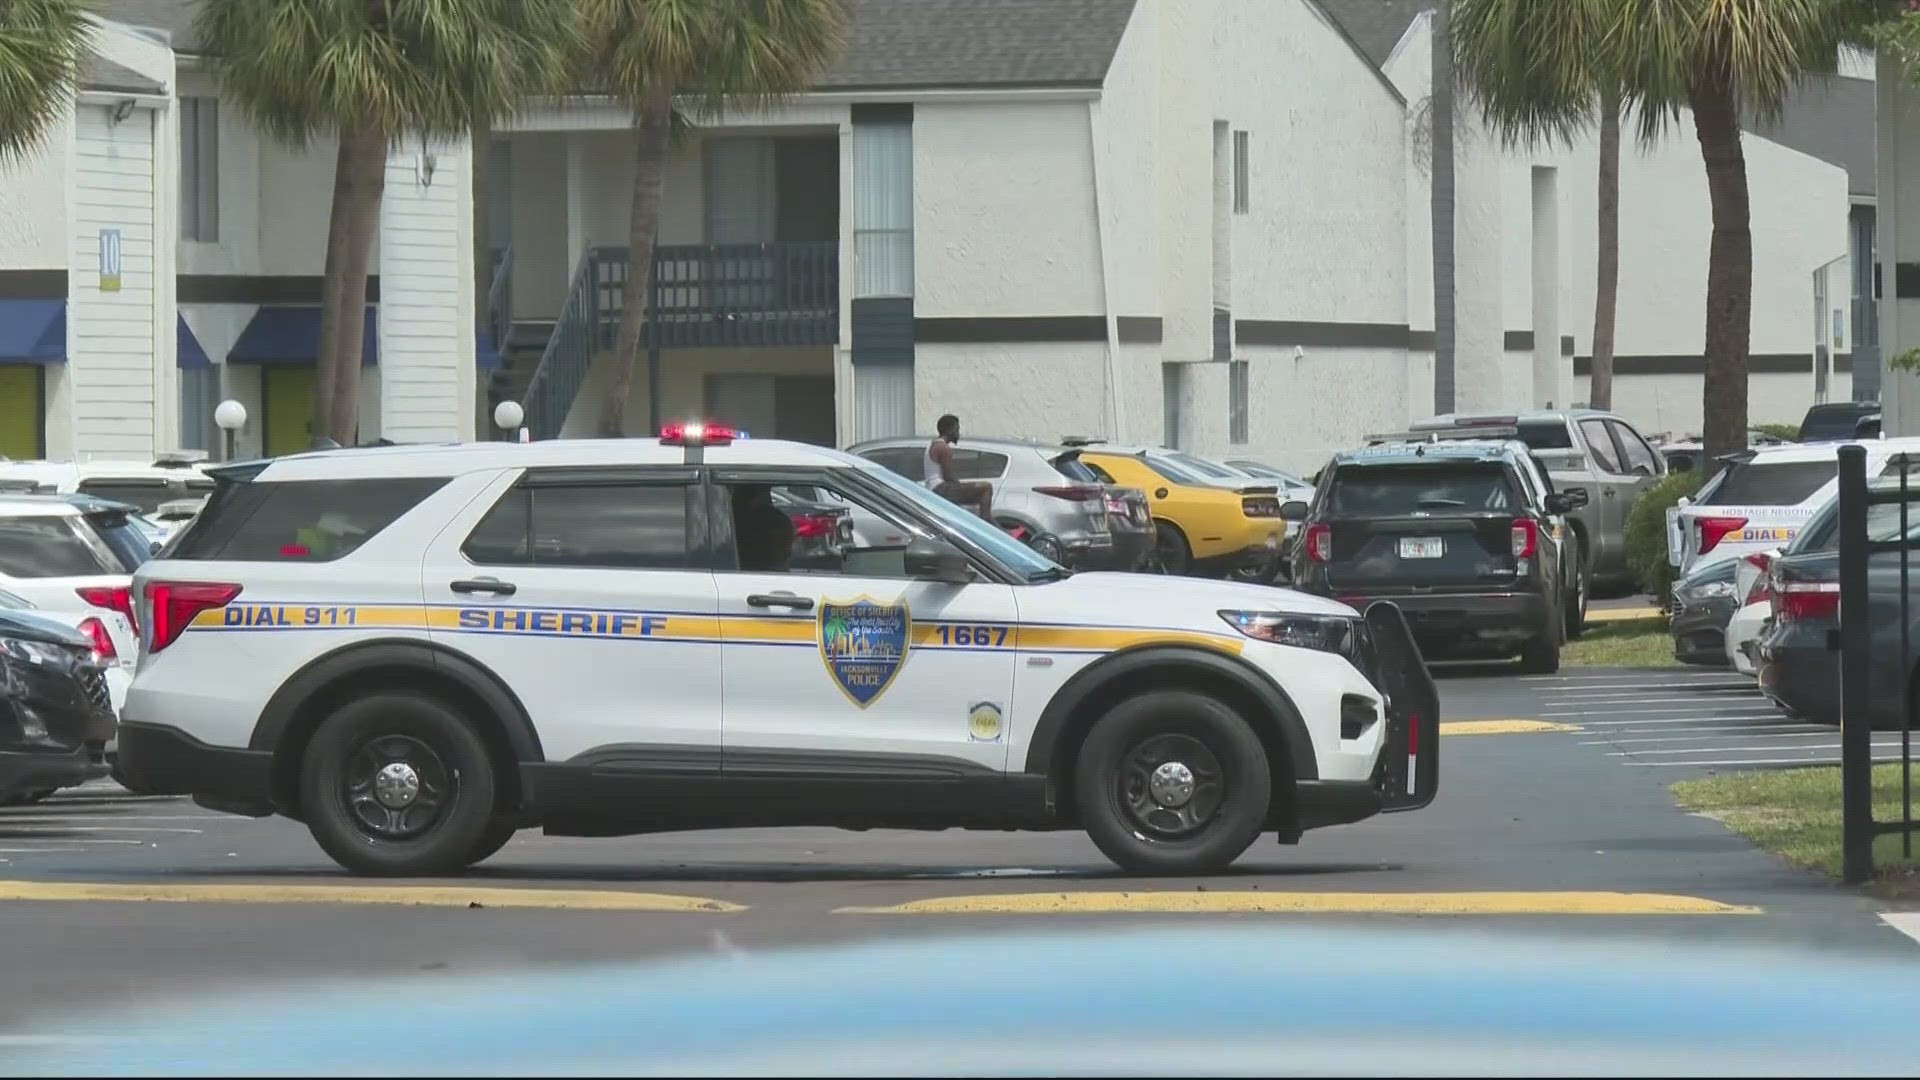 Man shot by Jacksonville police after stand-off | firstcoastnews.com